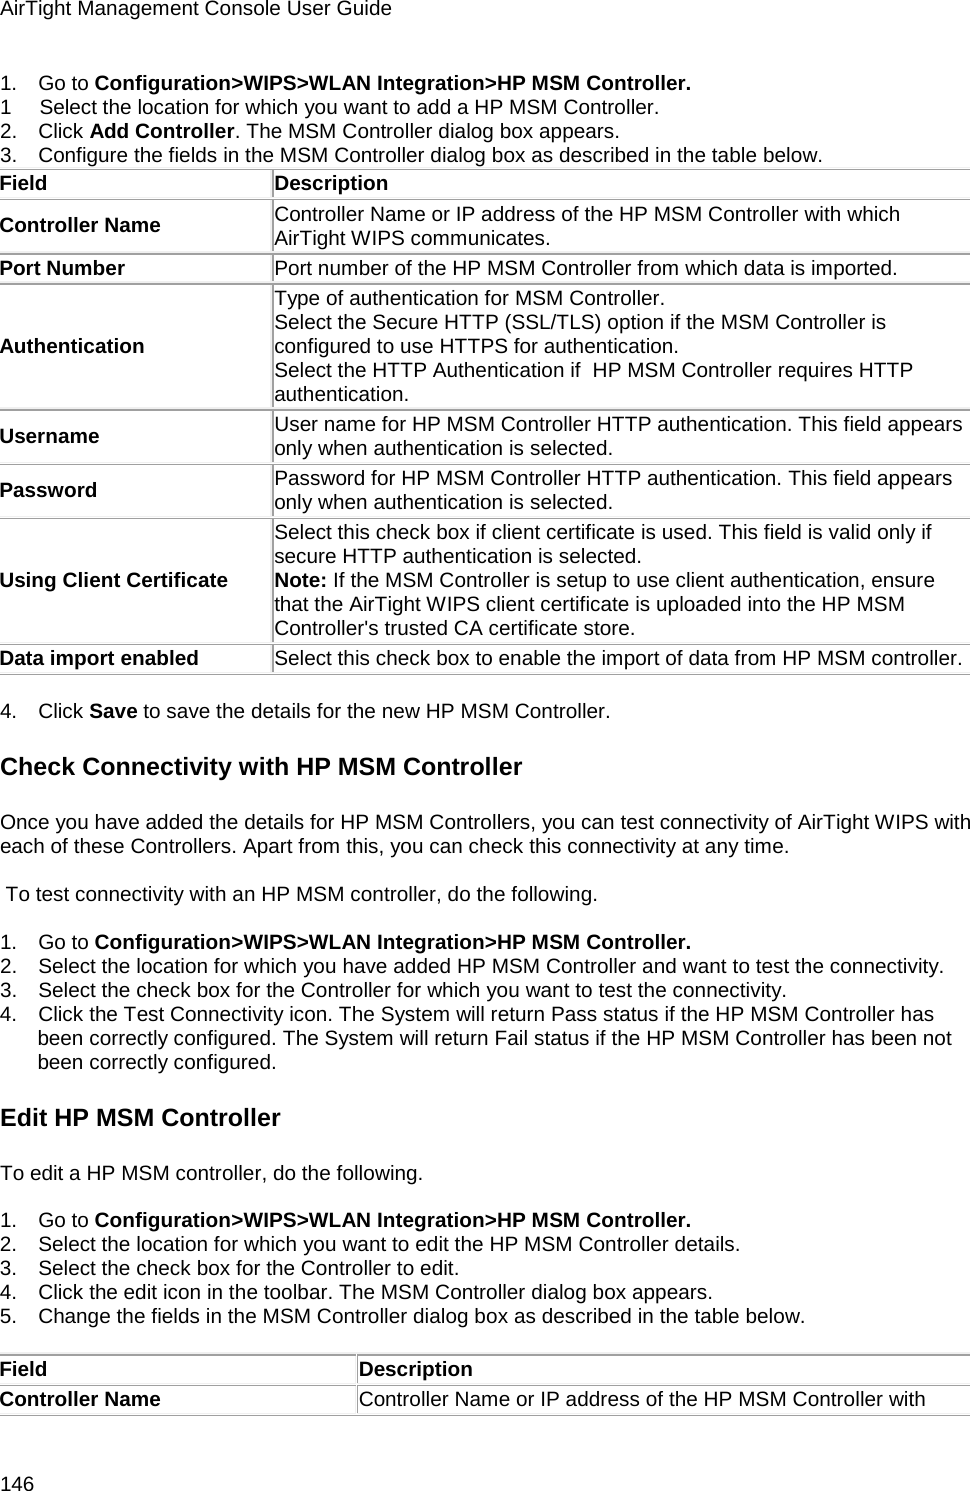 AirTight Management Console User Guide 146 1.      Go to Configuration&gt;WIPS&gt;WLAN Integration&gt;HP MSM Controller. 1        Select the location for which you want to add a HP MSM Controller. 2.      Click Add Controller. The MSM Controller dialog box appears. 3.      Configure the fields in the MSM Controller dialog box as described in the table below. Field Description Controller Name Controller Name or IP address of the HP MSM Controller with which AirTight WIPS communicates. Port Number Port number of the HP MSM Controller from which data is imported. Authentication Type of authentication for MSM Controller.  Select the Secure HTTP (SSL/TLS) option if the MSM Controller is configured to use HTTPS for authentication.  Select the HTTP Authentication if  HP MSM Controller requires HTTP authentication. Username User name for HP MSM Controller HTTP authentication. This field appears only when authentication is selected. Password Password for HP MSM Controller HTTP authentication. This field appears only when authentication is selected. Using Client Certificate Select this check box if client certificate is used. This field is valid only if secure HTTP authentication is selected.  Note: If the MSM Controller is setup to use client authentication, ensure that the AirTight WIPS client certificate is uploaded into the HP MSM Controller&apos;s trusted CA certificate store. Data import enabled Select this check box to enable the import of data from HP MSM controller.   4.      Click Save to save the details for the new HP MSM Controller. Check Connectivity with HP MSM Controller Once you have added the details for HP MSM Controllers, you can test connectivity of AirTight WIPS with each of these Controllers. Apart from this, you can check this connectivity at any time.     To test connectivity with an HP MSM controller, do the following.   1.      Go to Configuration&gt;WIPS&gt;WLAN Integration&gt;HP MSM Controller. 2.      Select the location for which you have added HP MSM Controller and want to test the connectivity. 3.      Select the check box for the Controller for which you want to test the connectivity. 4.      Click the Test Connectivity icon. The System will return Pass status if the HP MSM Controller has been correctly configured. The System will return Fail status if the HP MSM Controller has been not been correctly configured. Edit HP MSM Controller To edit a HP MSM controller, do the following.   1.      Go to Configuration&gt;WIPS&gt;WLAN Integration&gt;HP MSM Controller. 2.      Select the location for which you want to edit the HP MSM Controller details. 3.      Select the check box for the Controller to edit. 4.      Click the edit icon in the toolbar. The MSM Controller dialog box appears. 5.      Change the fields in the MSM Controller dialog box as described in the table below.   Field Description Controller Name Controller Name or IP address of the HP MSM Controller with 